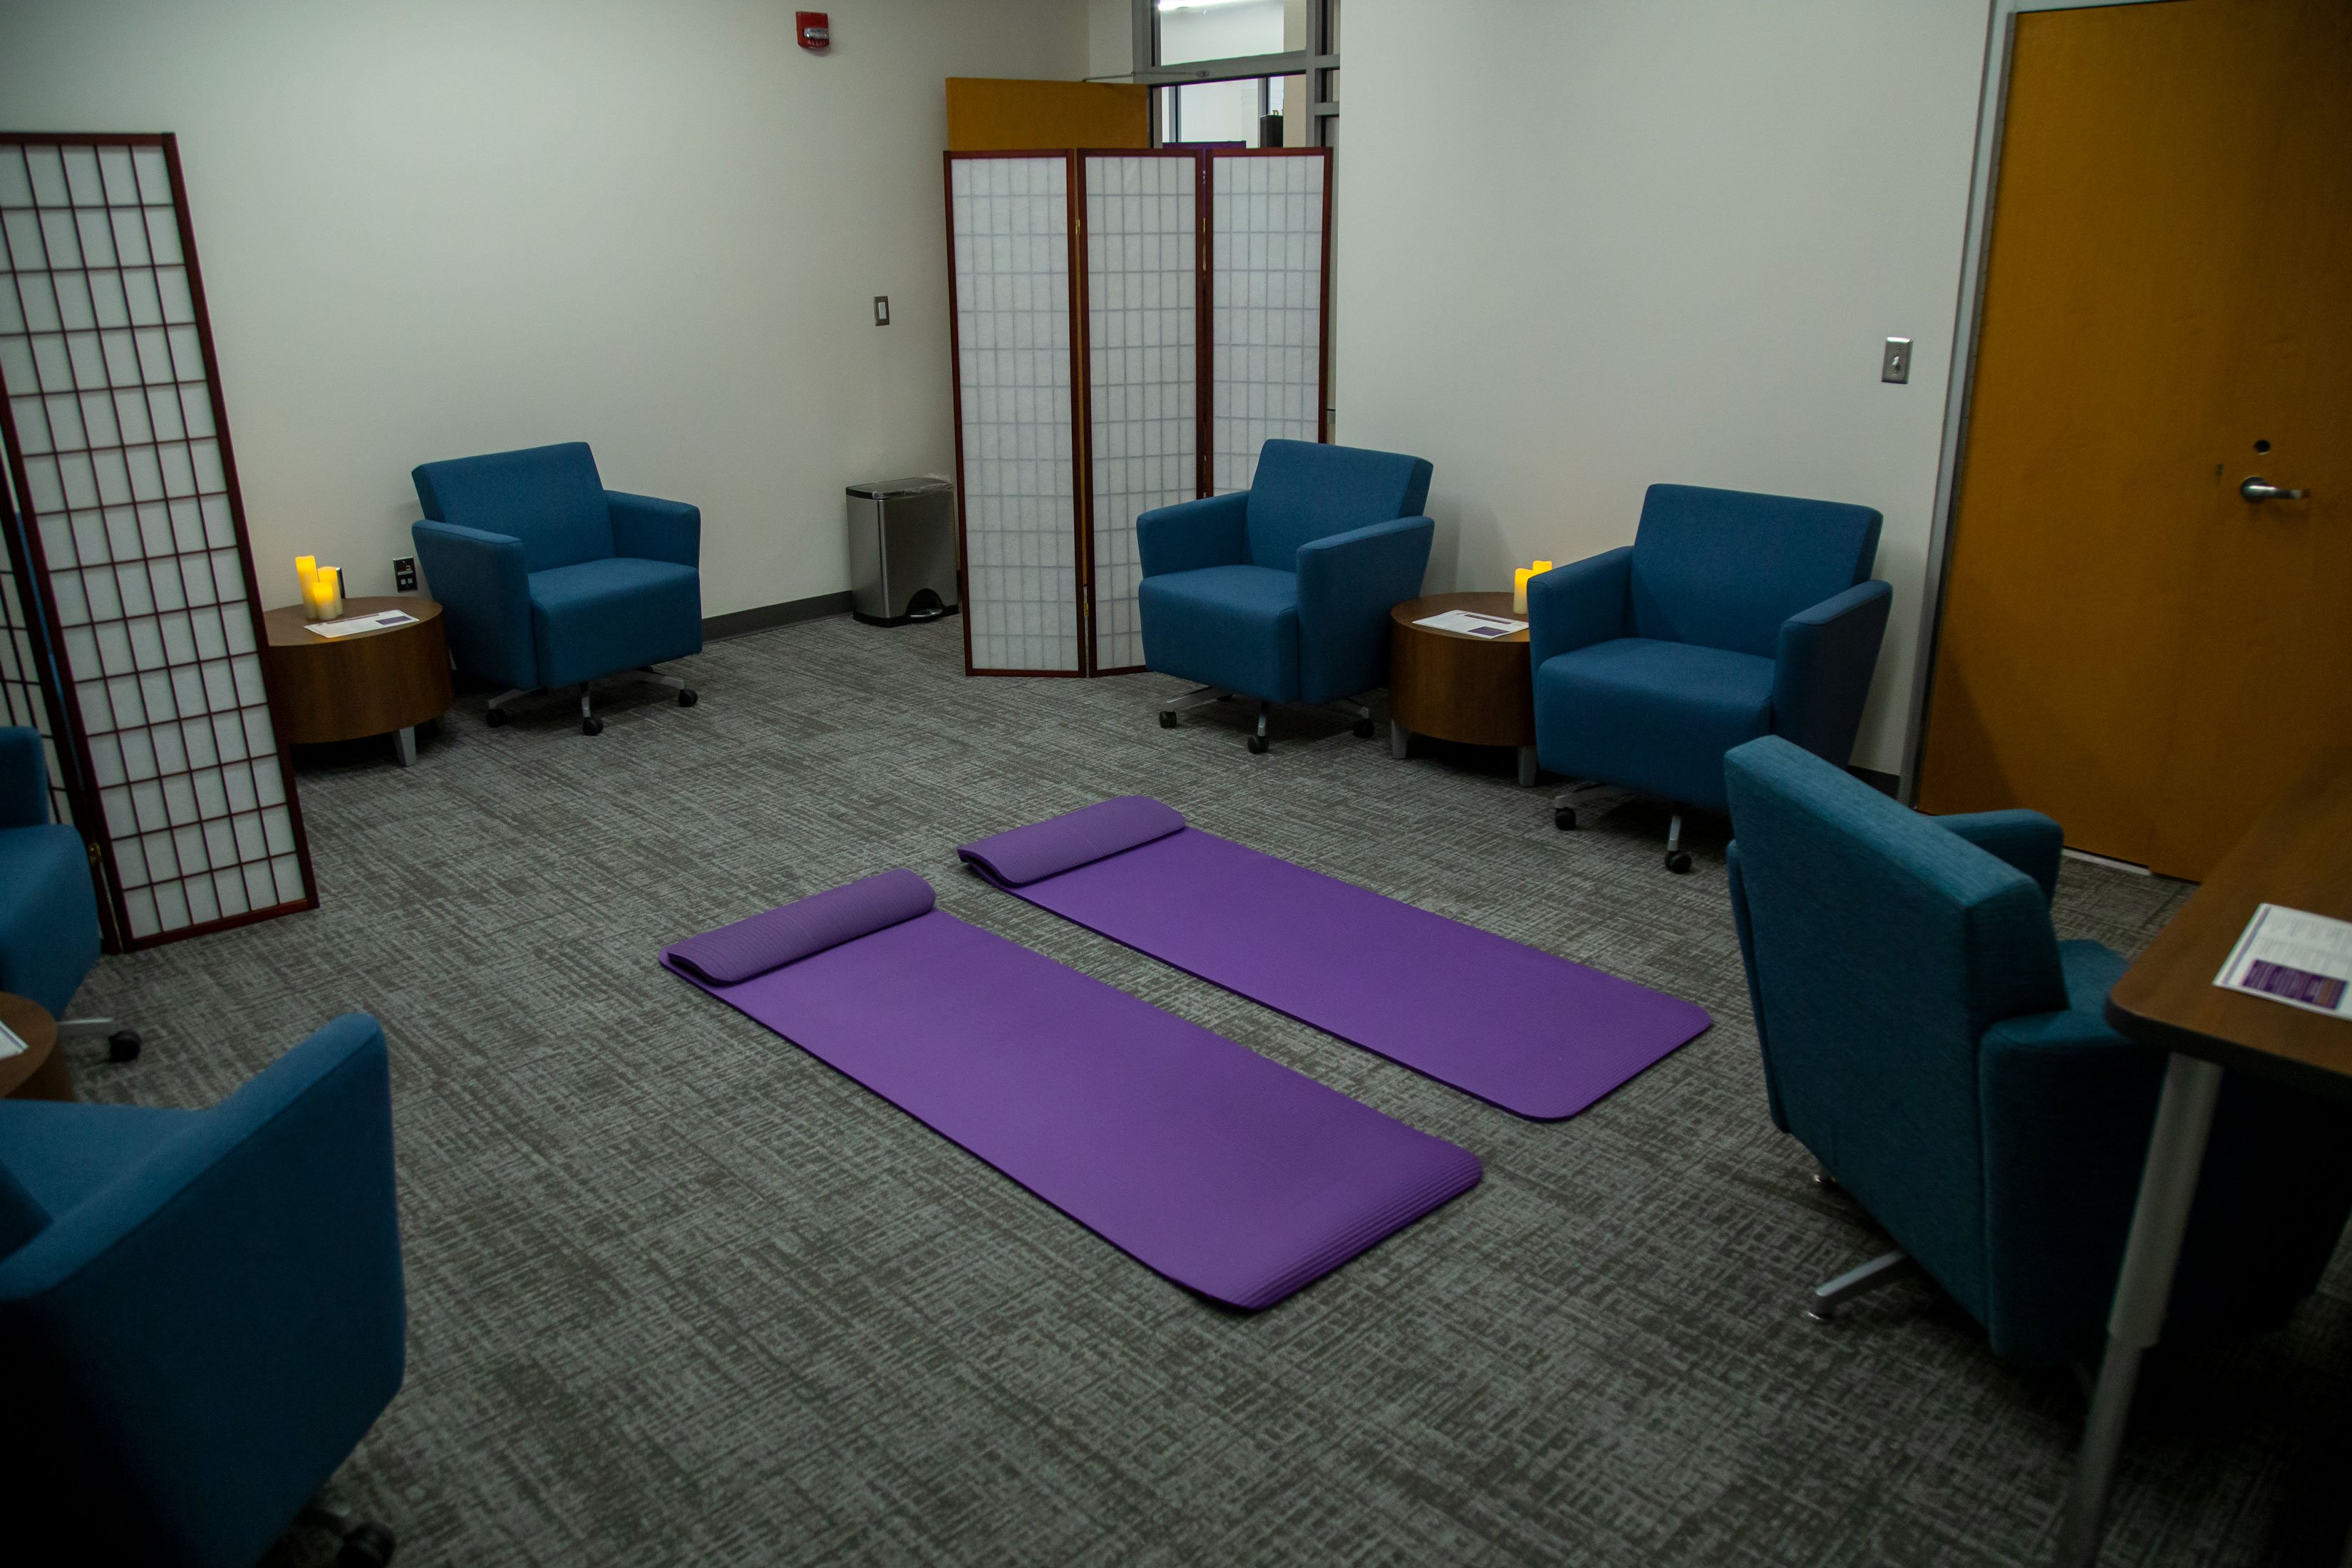 A room with dimmed lights, yoga matts, comfortable chairs and battery-operated candles.